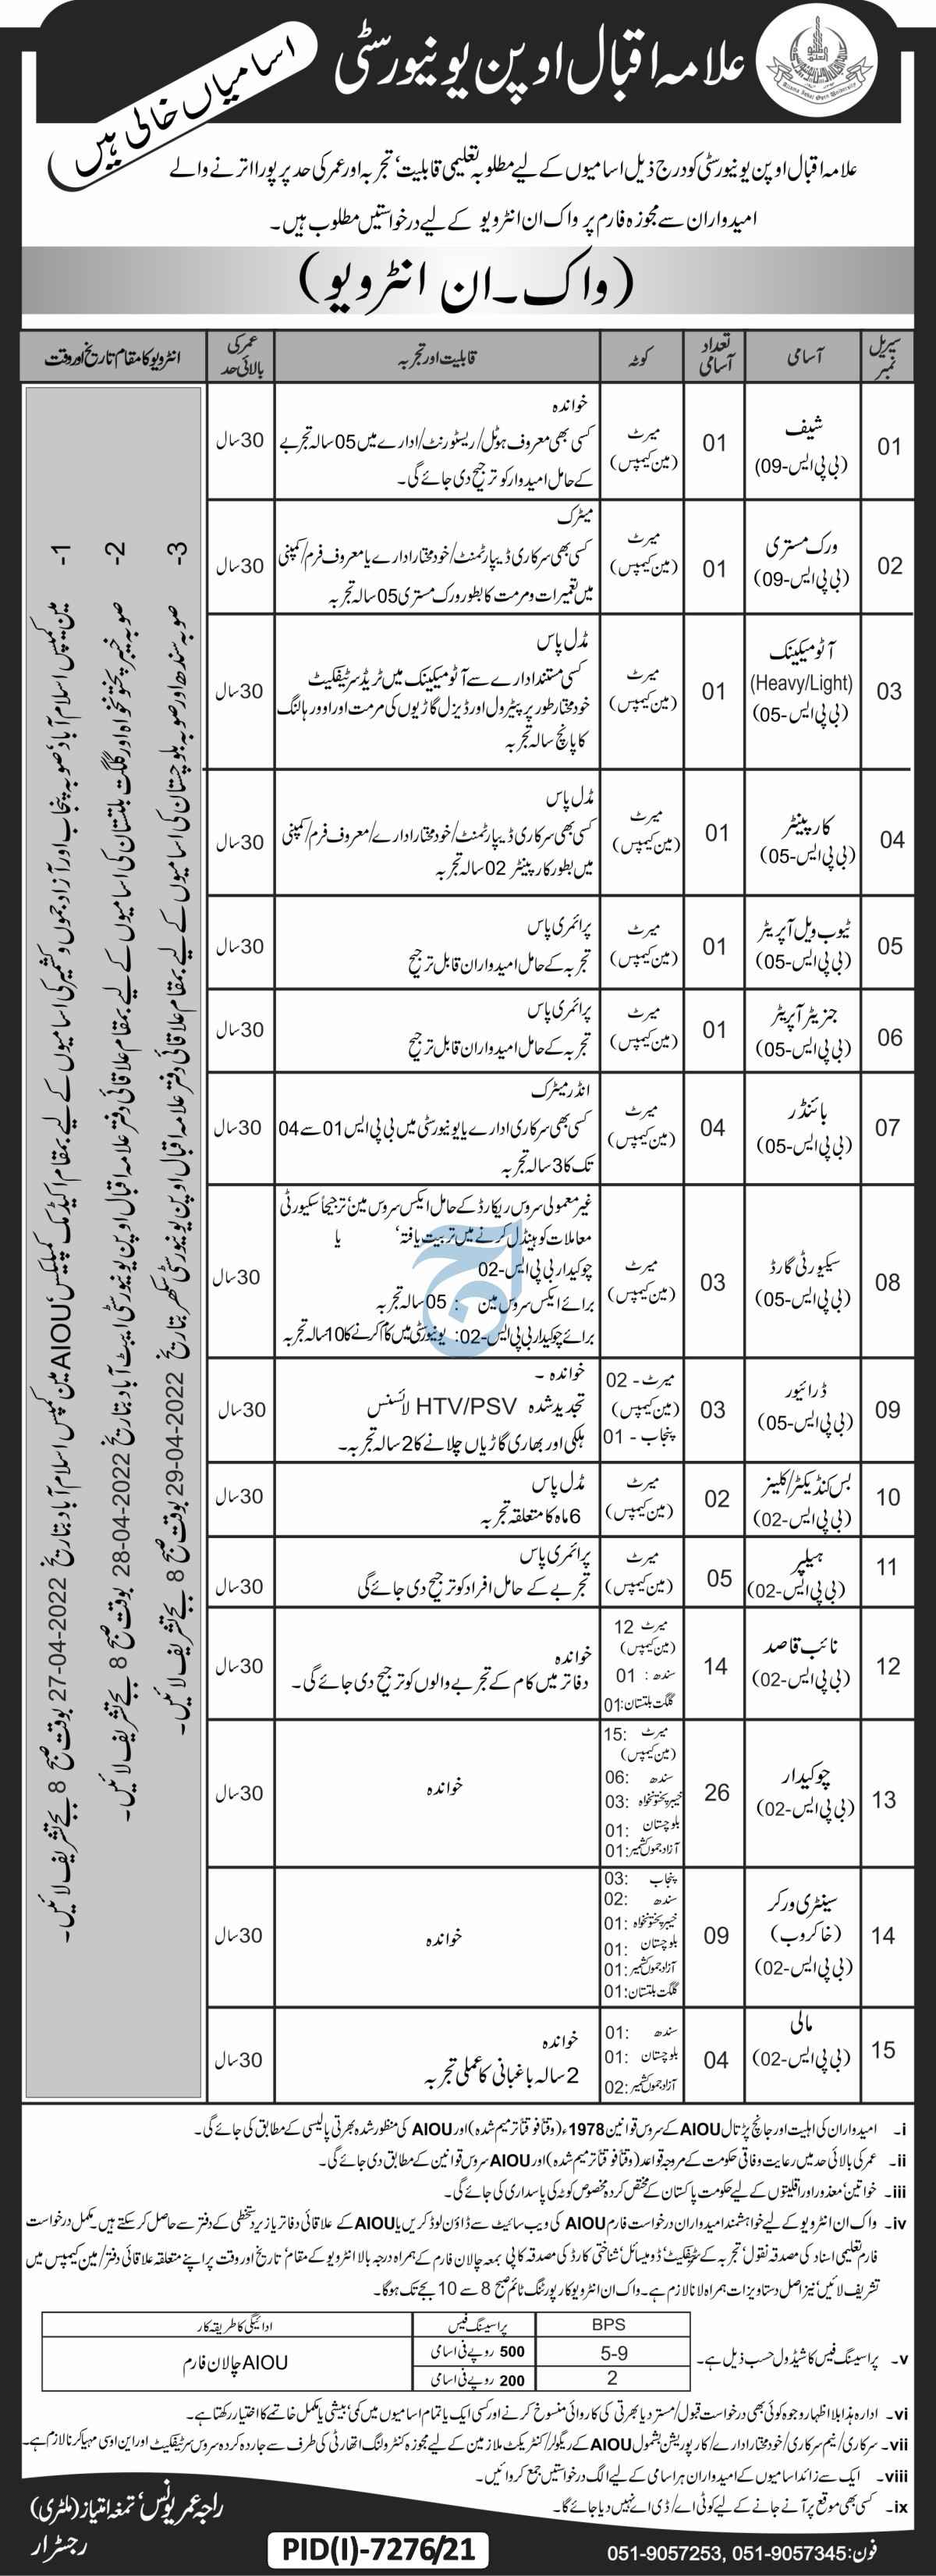 nterview Dates for jobs at Allama Iqbal Open University 2022